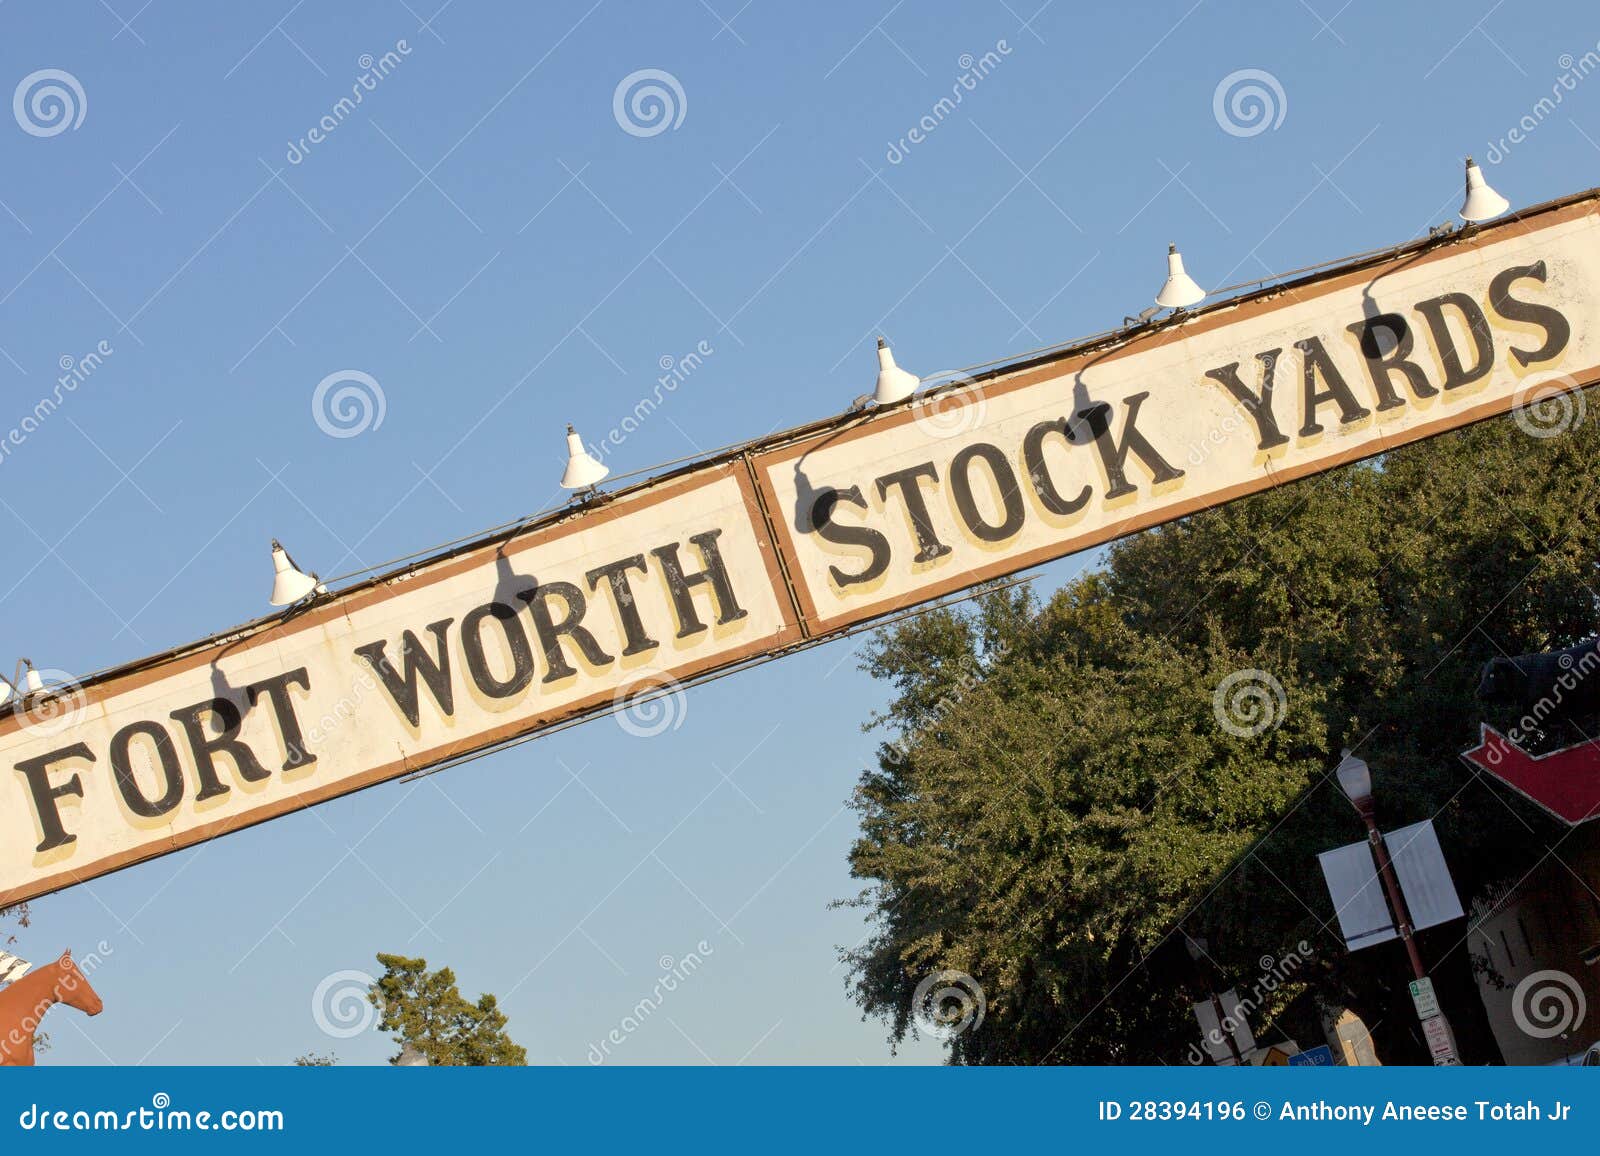 https://thumbs.dreamstime.com/z/ft-worth-stock-yards-sign-28394196.jpg